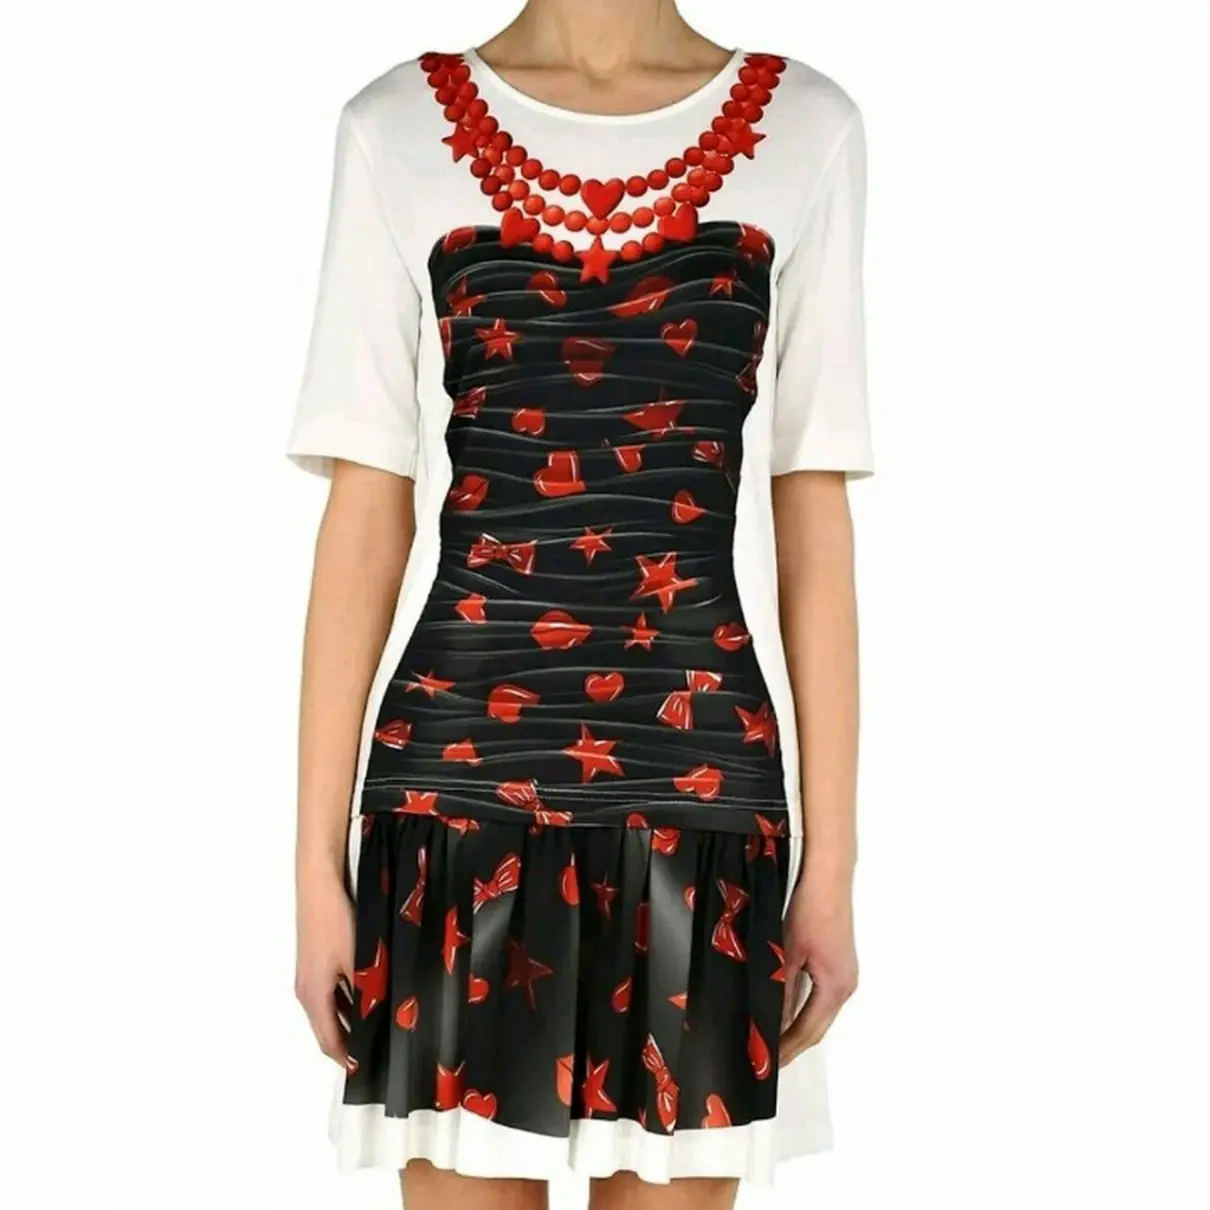 Moschino Mid-length dress for sale